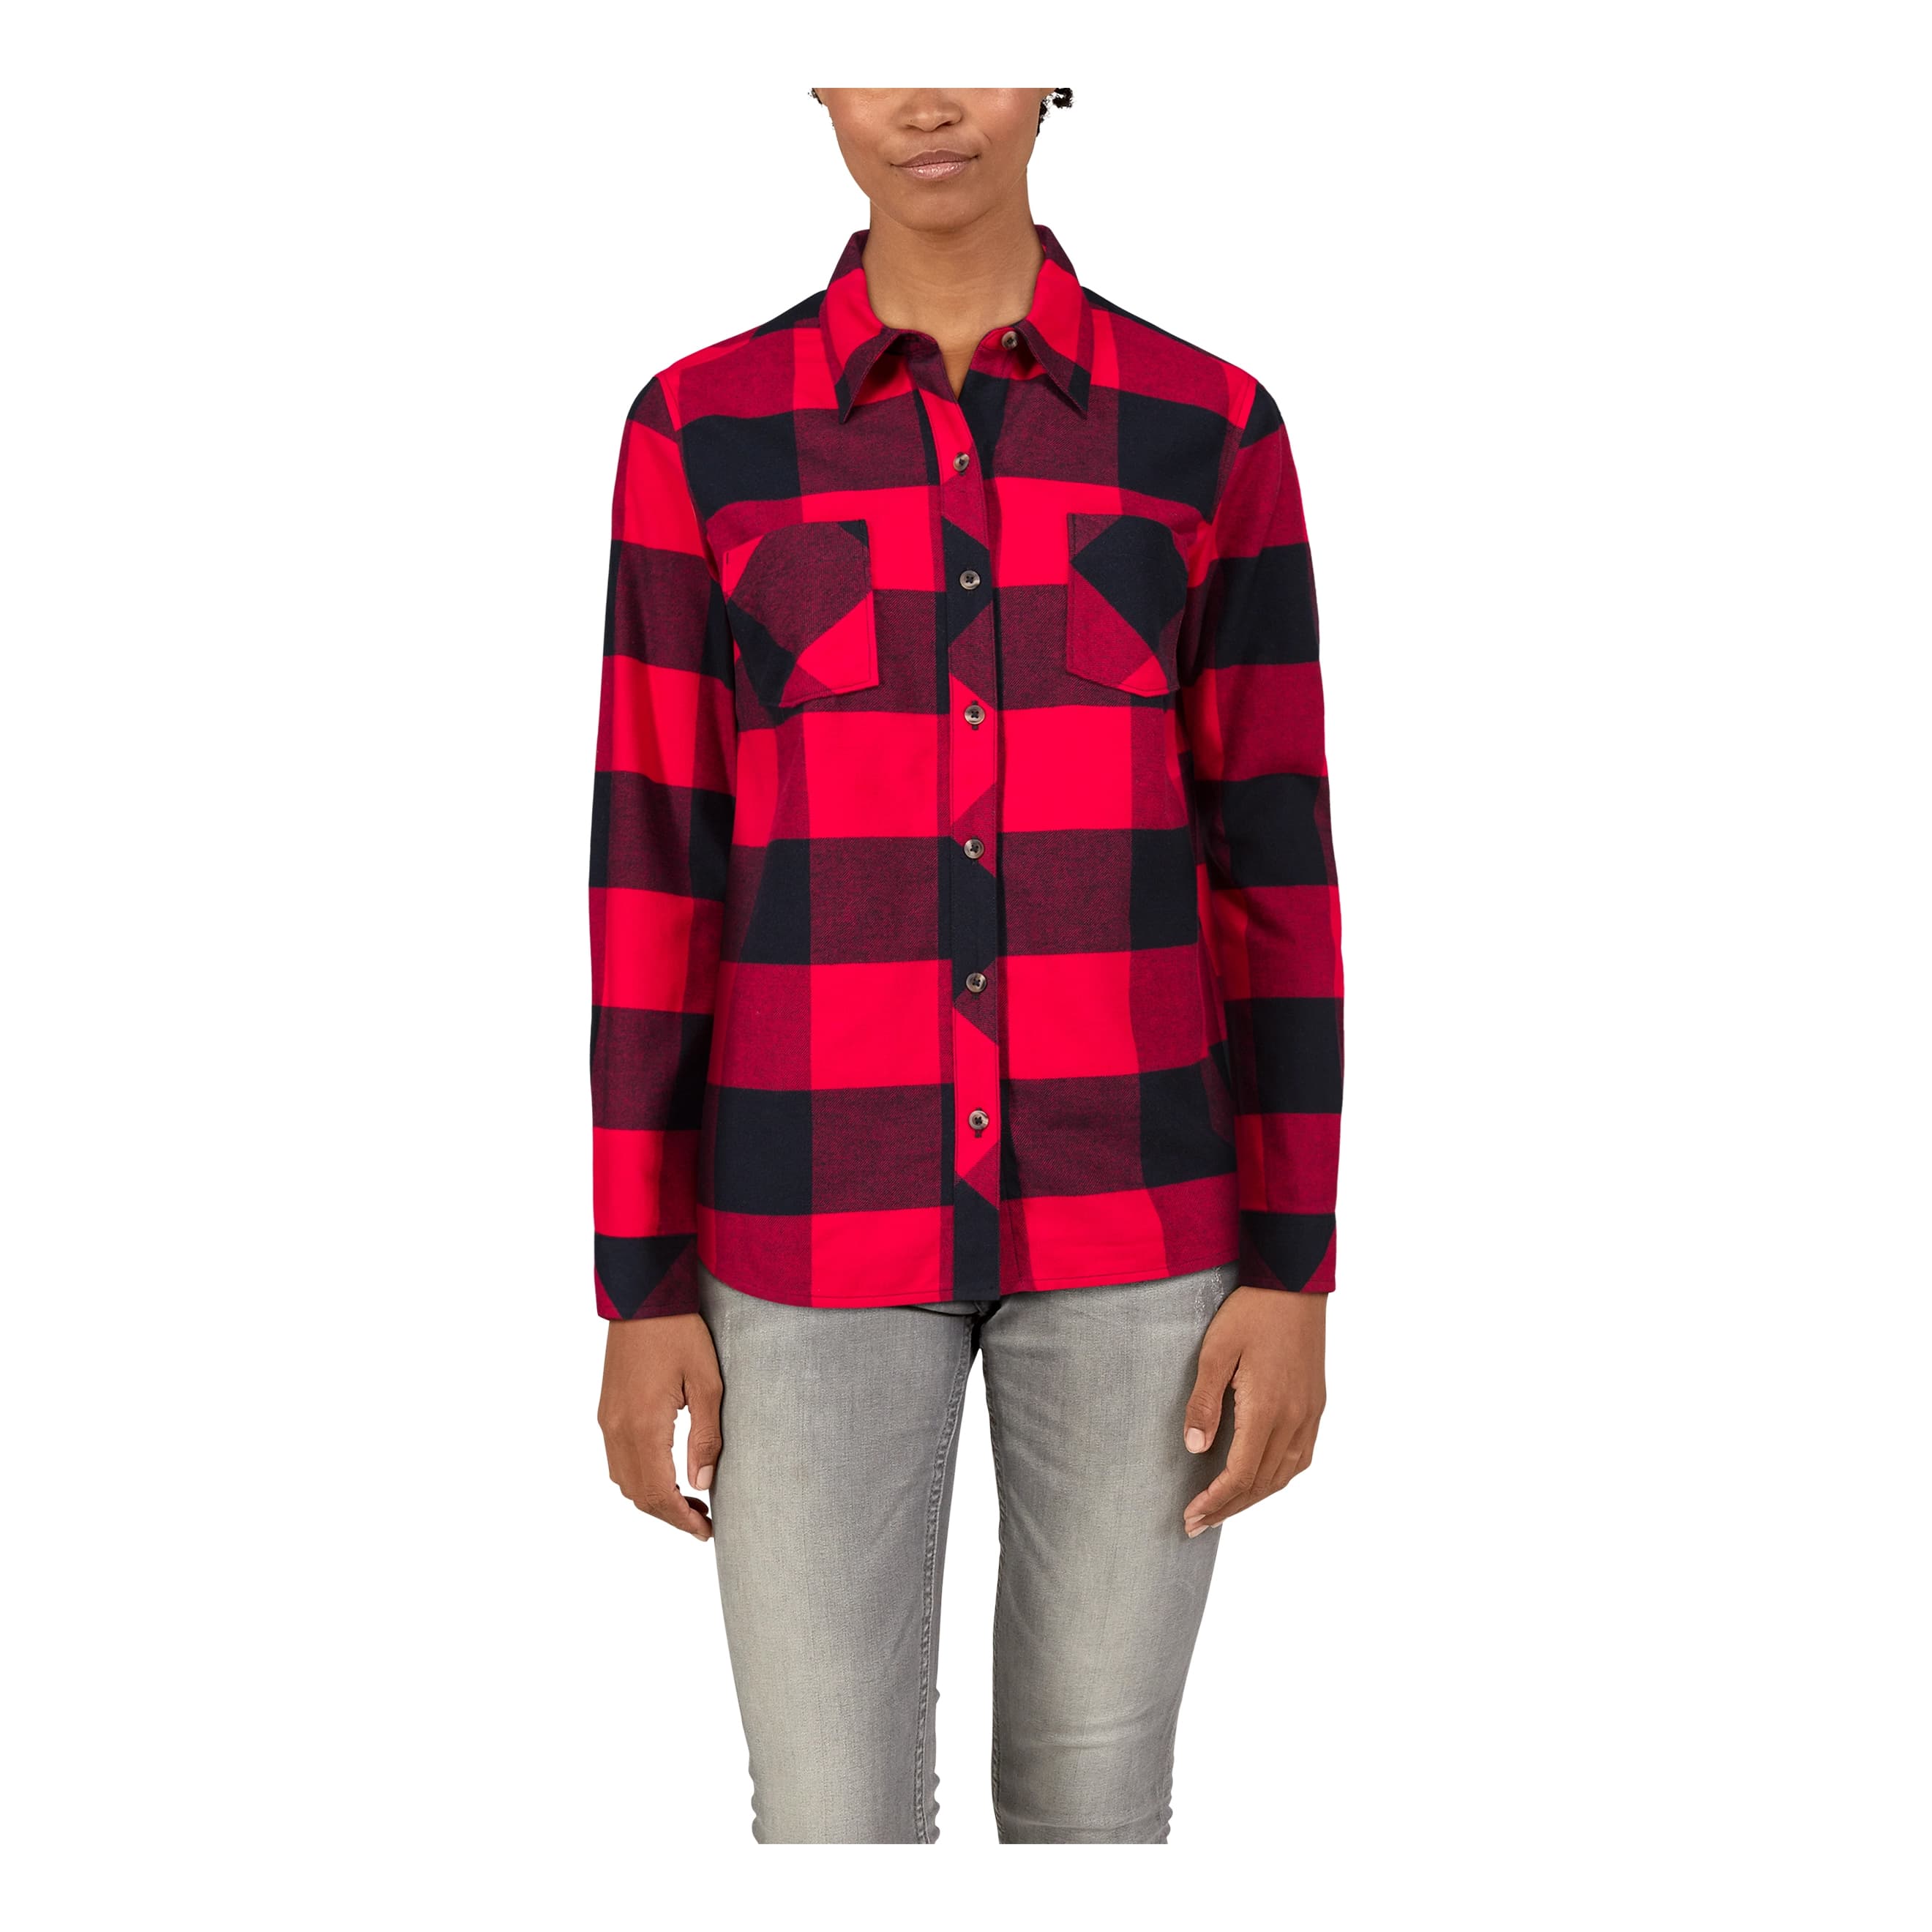 Natural Reflections® Women’s Long-Sleeve Brushed Flannel Shirt - Chili Pepper/Anthracite